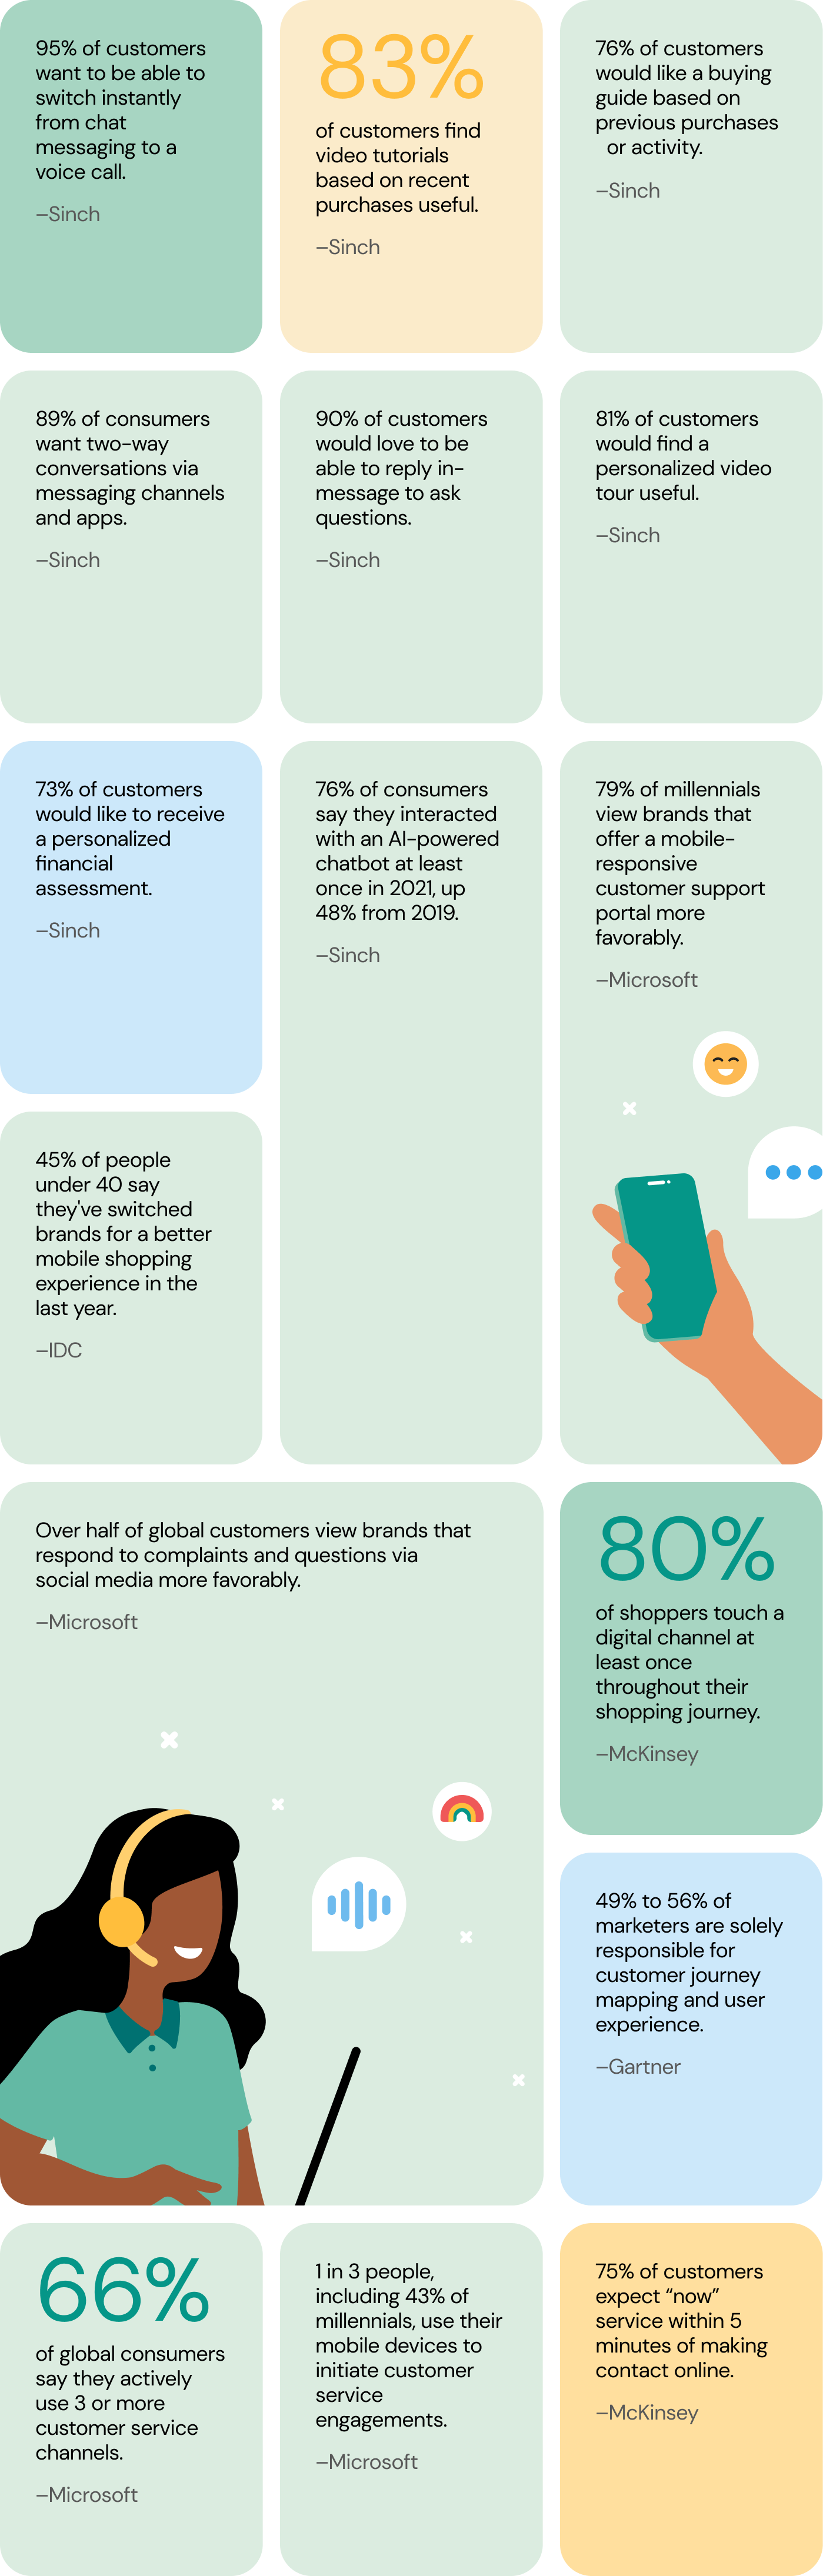 Graphic shows how mobile phones are important for a good customer experience